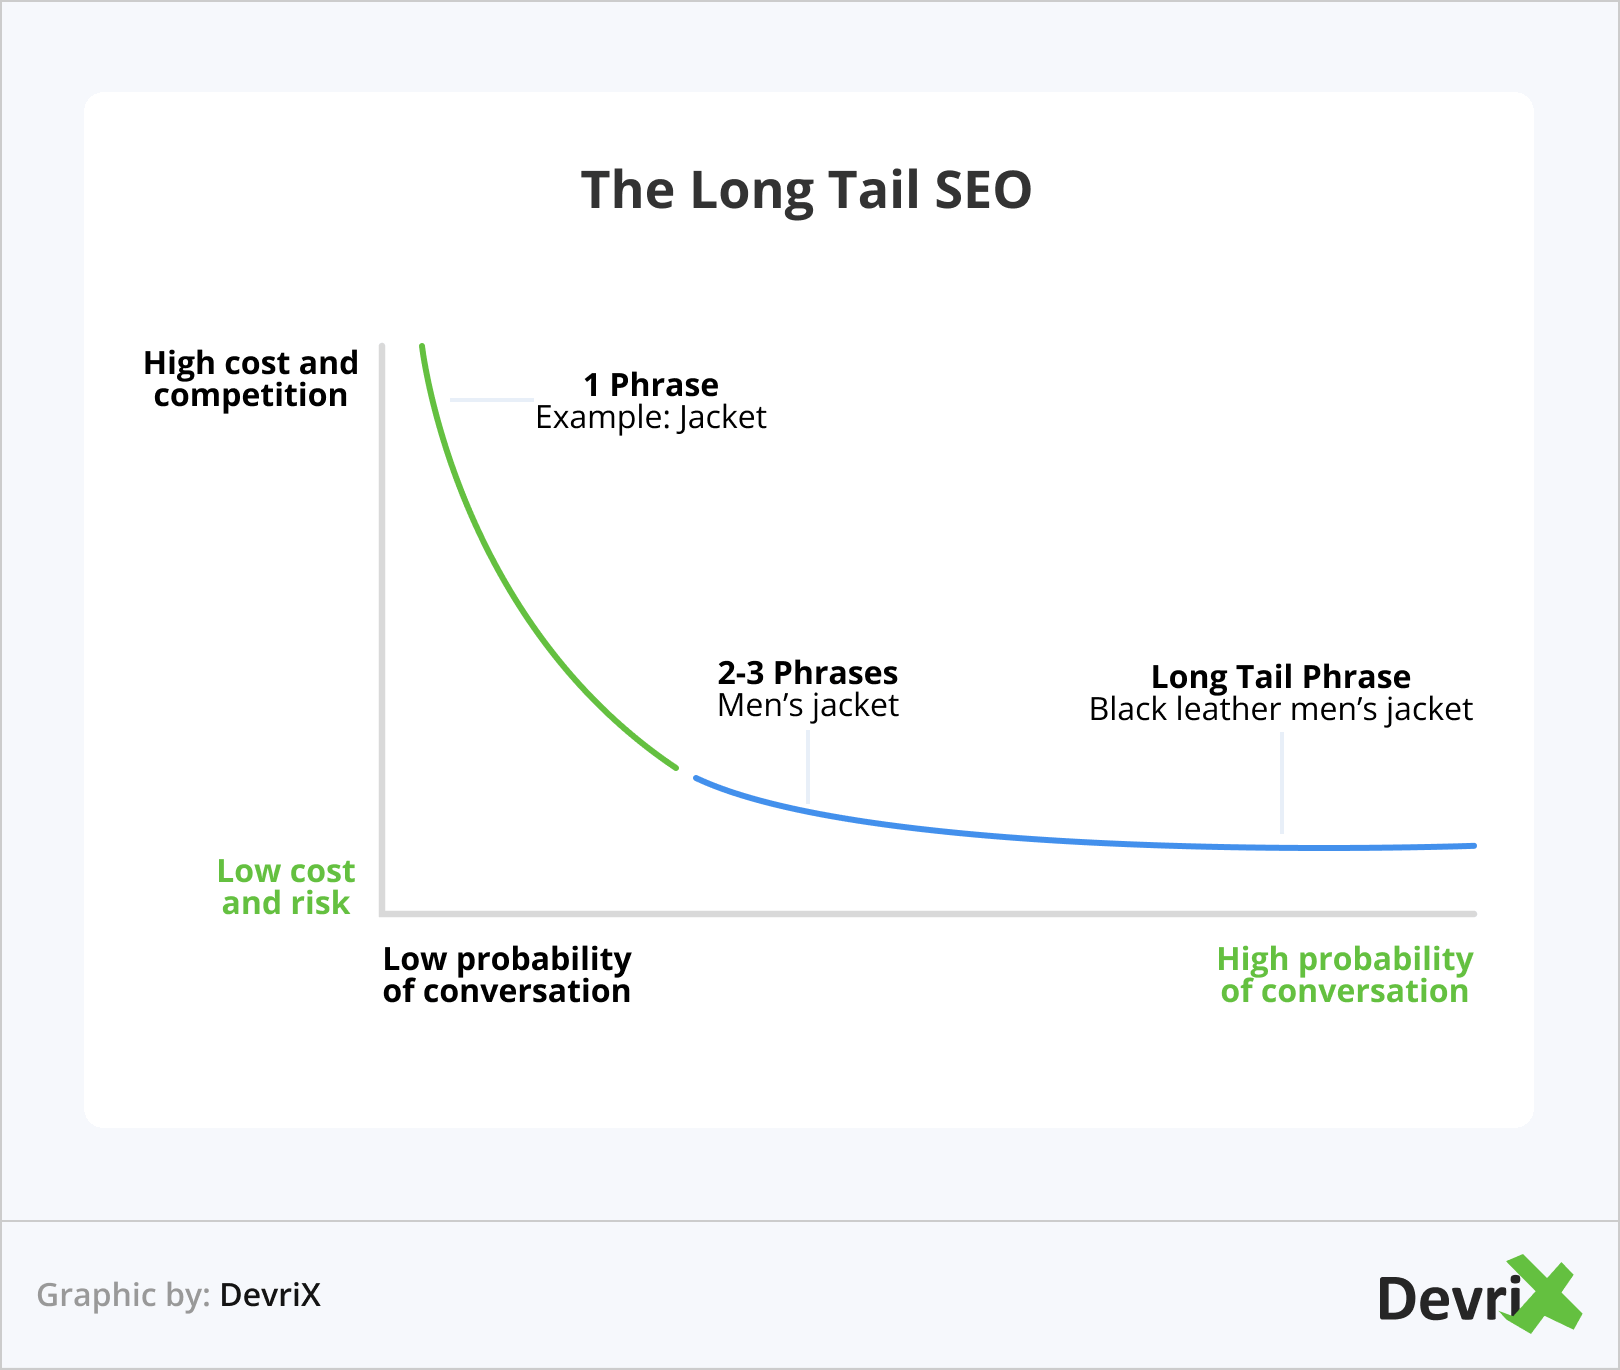 The Long Tail SEO